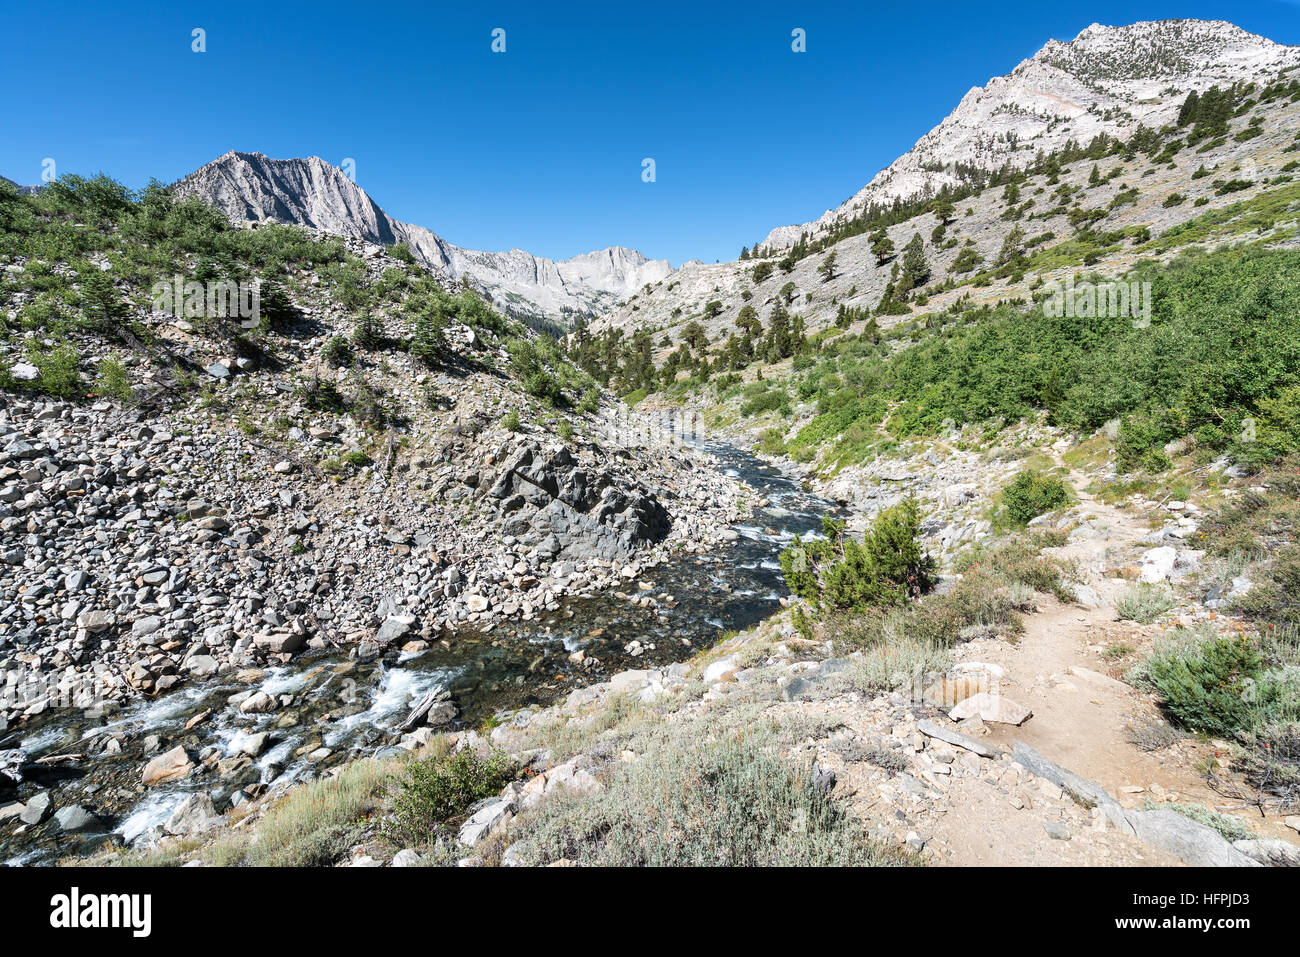 On John Muir Trail, Kings Canyon National Park, California, United States of America, North America Stock Photo